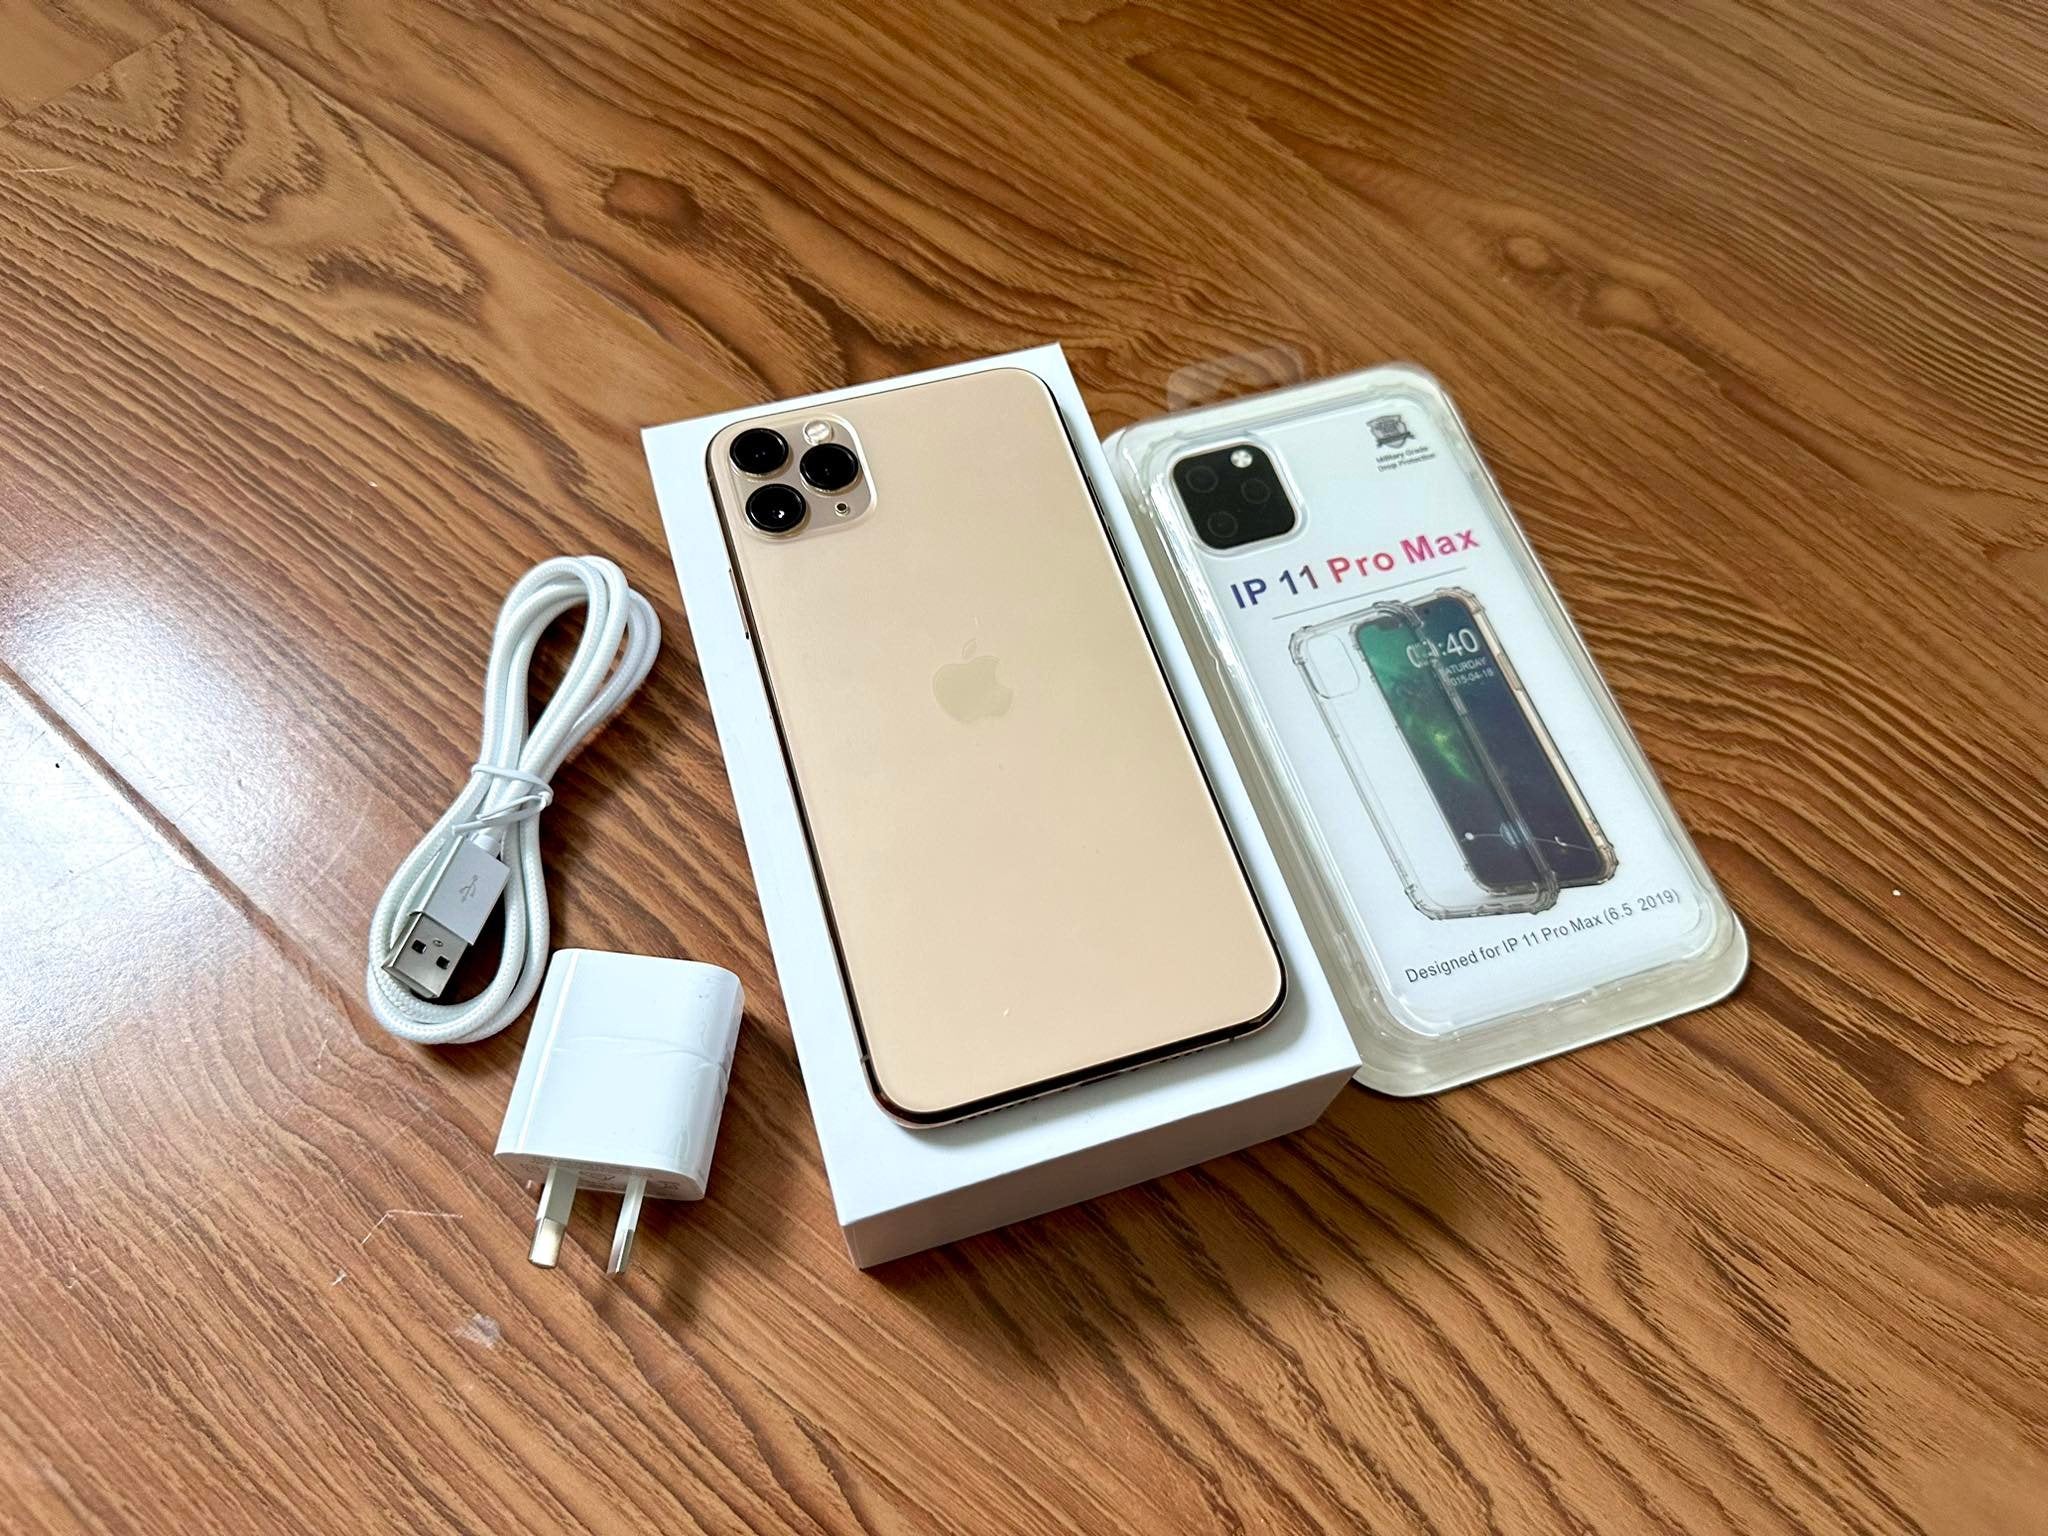 Apple iPhone 11 Pro Max 256GB Gold (As New) New Case, Screen Protector & Shipping